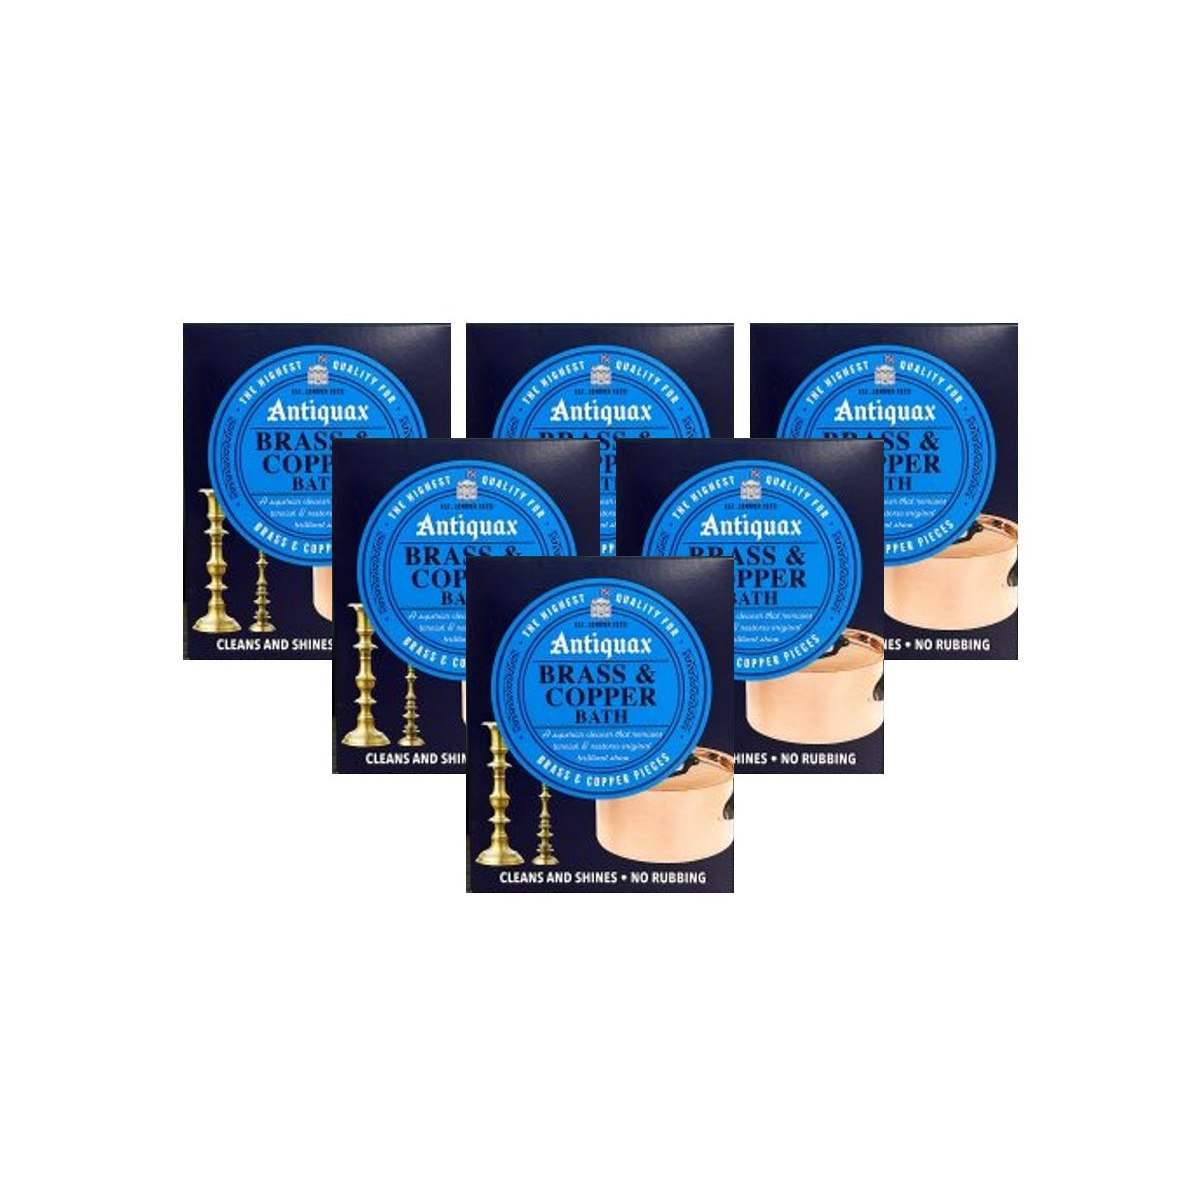 Case of 6 x Antiquax Brass and Copper Bath 5 x 30g Sachets